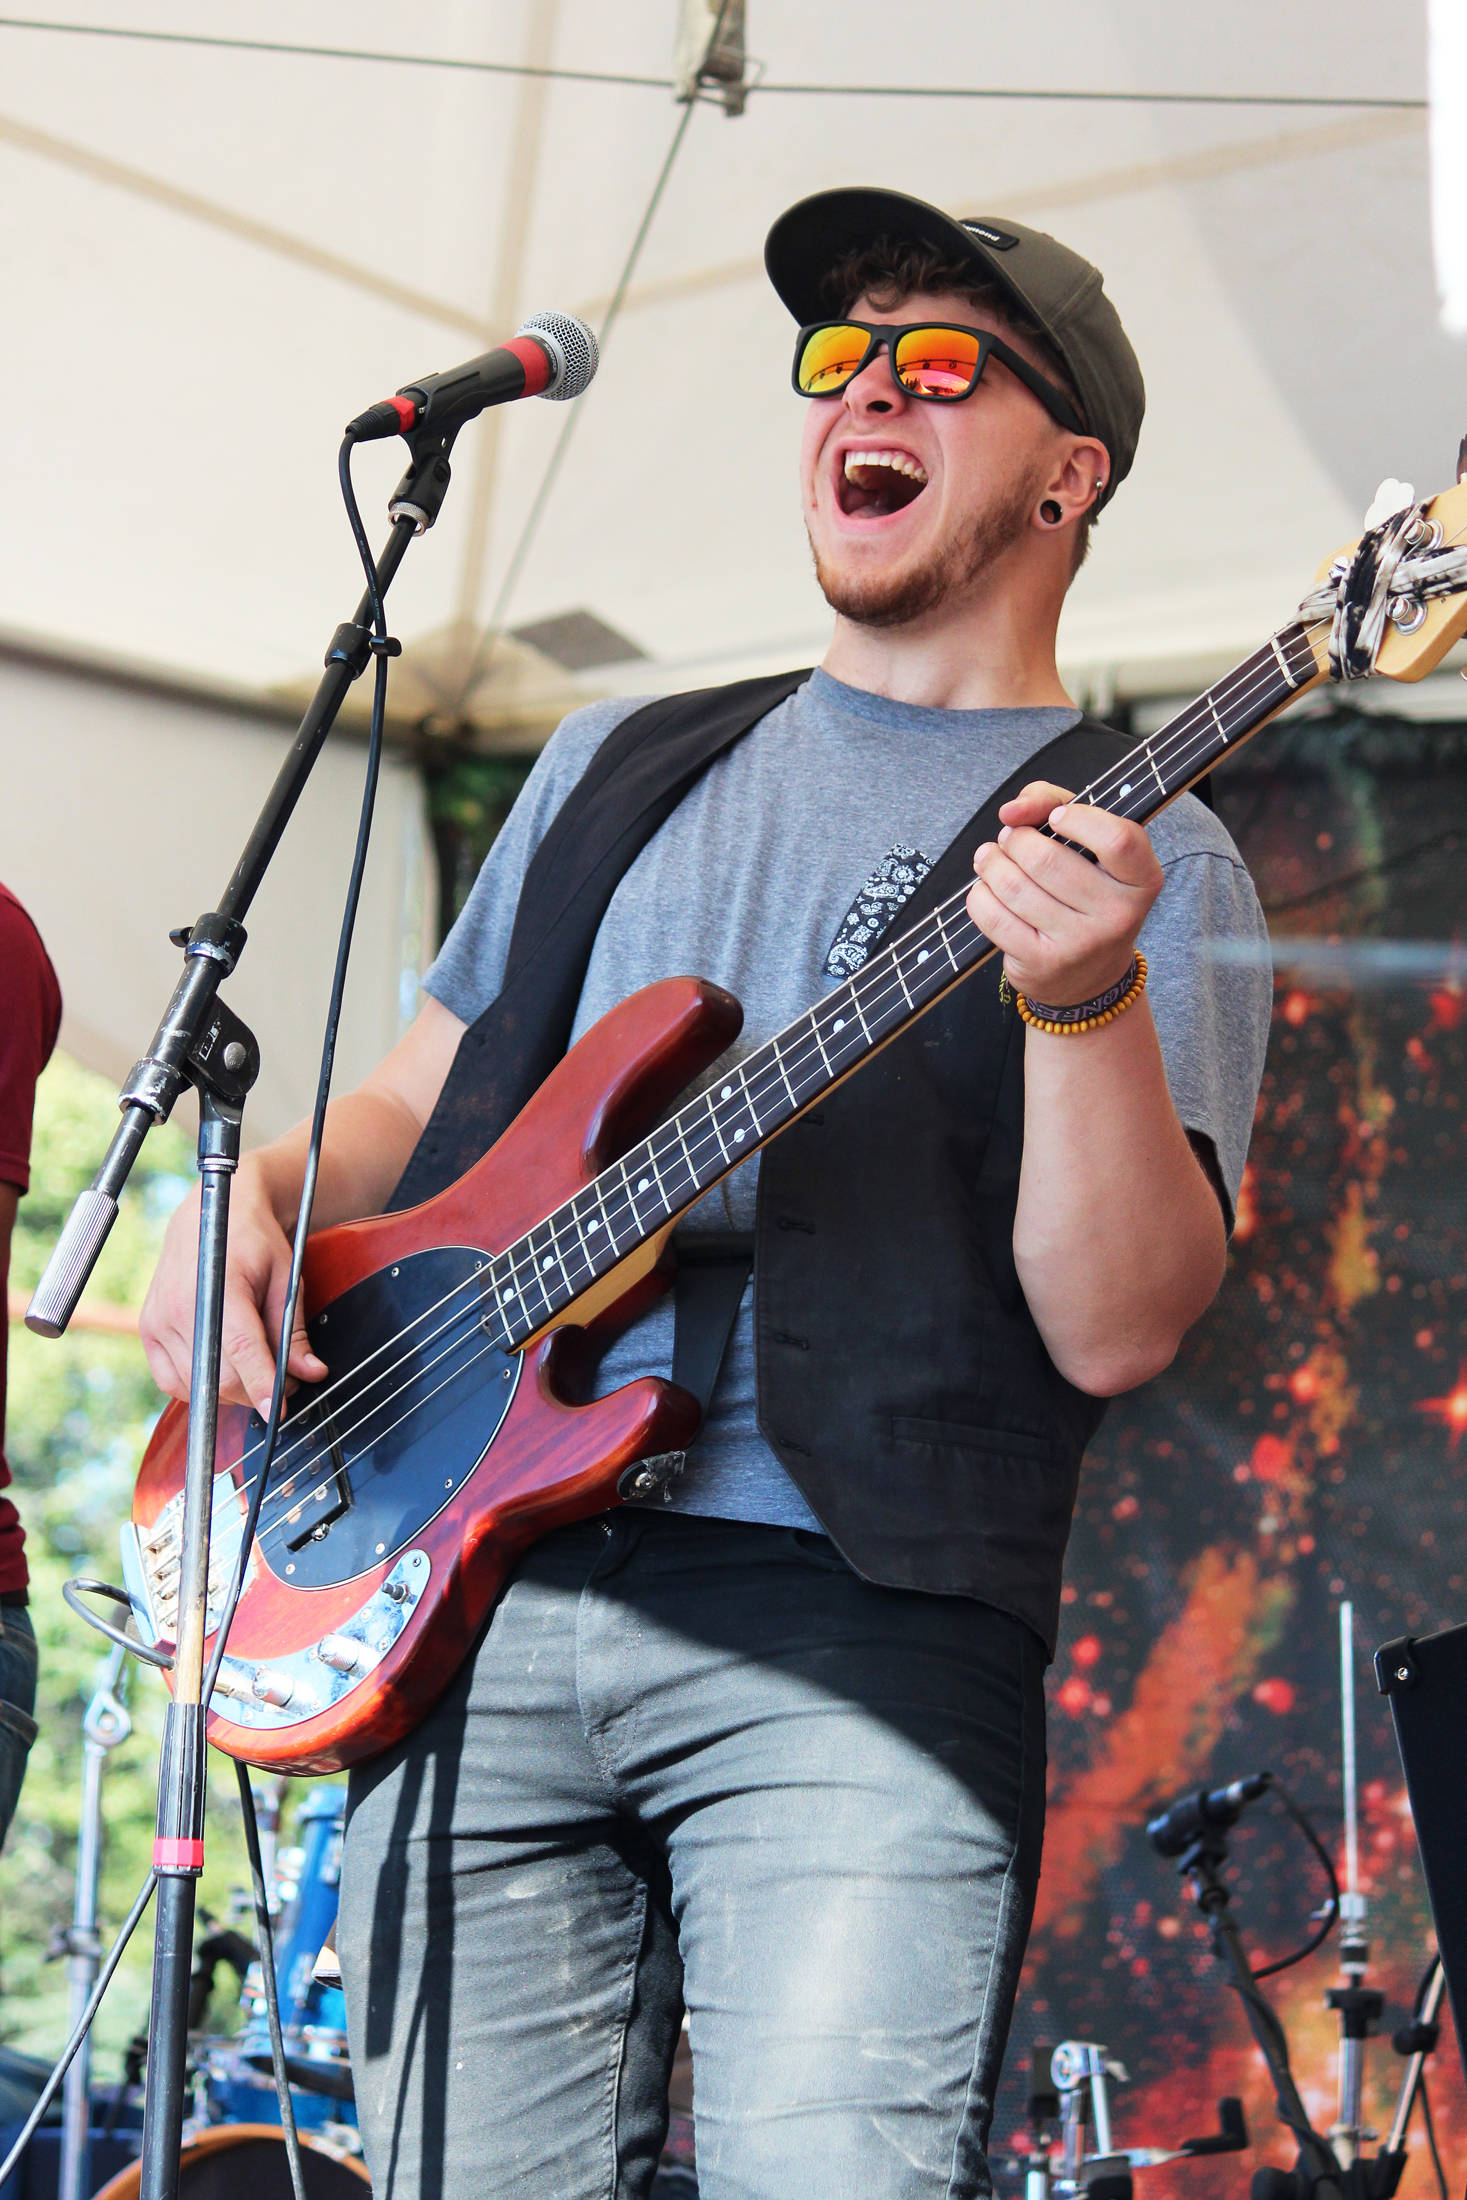 Ben Sayers, bass player for Blackwater Railroad Company, performs with the band on the River Stage on Friday, Aug. 2, 2019 at Salmonfest in Ninilchik, Alaska. (Photo by Megan Pacer/Homer News)                                Ben Sayers, bass player for Blackwater Railroad Company, performs with the band on the River Stage on Friday, Aug. 2, 2019 at Salmonfest in Ninilchik, Alaska. (Photo by Megan Pacer/Homer News)